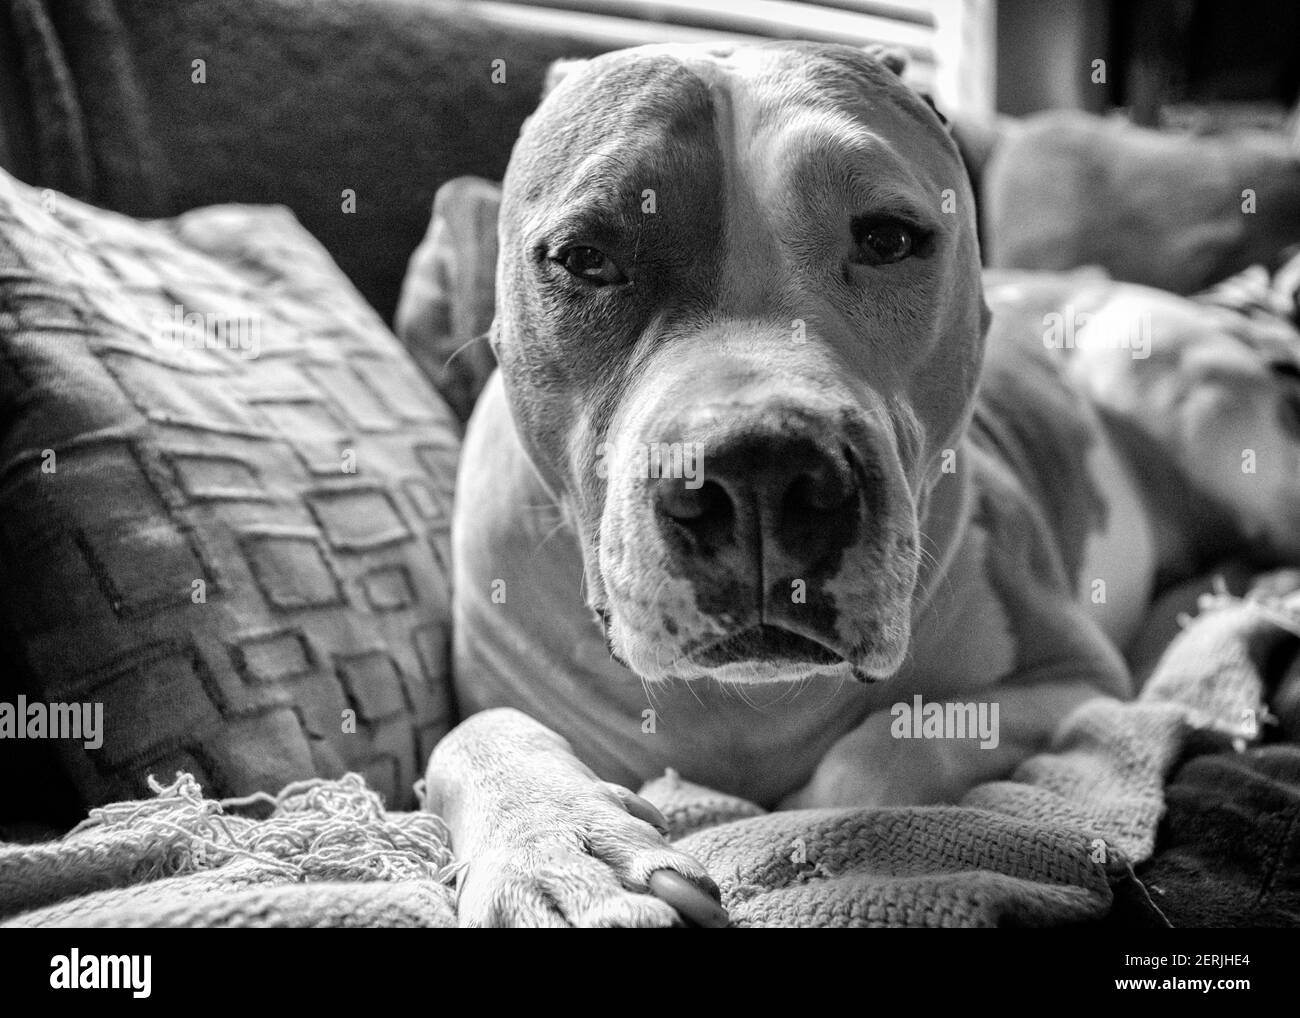 A mixed breed dog (American Staffordshire Pit Bull Terrier and American Pit Bull Terrier) (Canis lupus familiaris) looks straight at the camera. Stock Photo